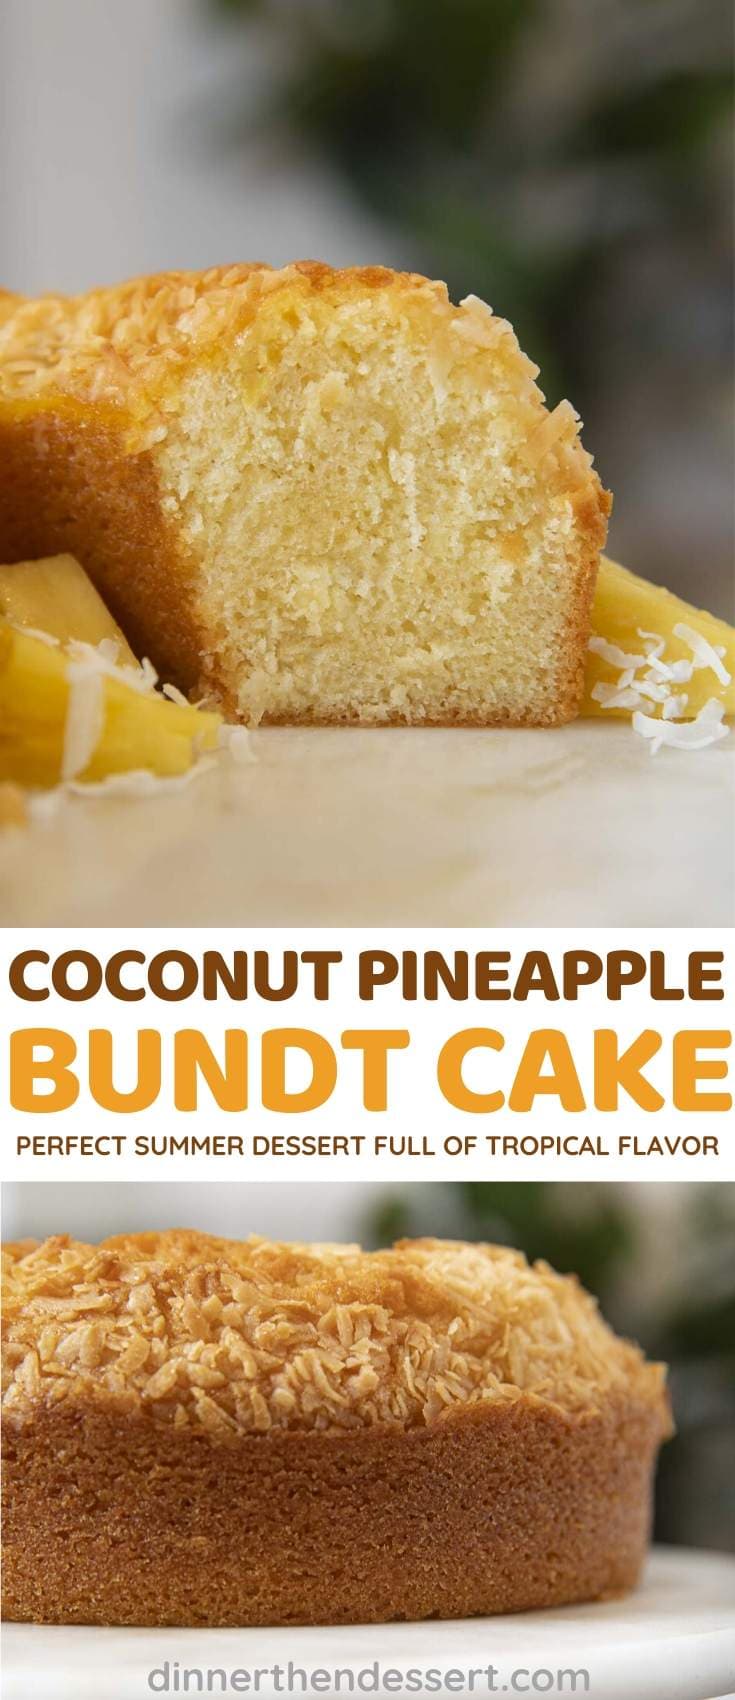 A Pineapple Pound Cake That'll Turn YOU Upside Down!